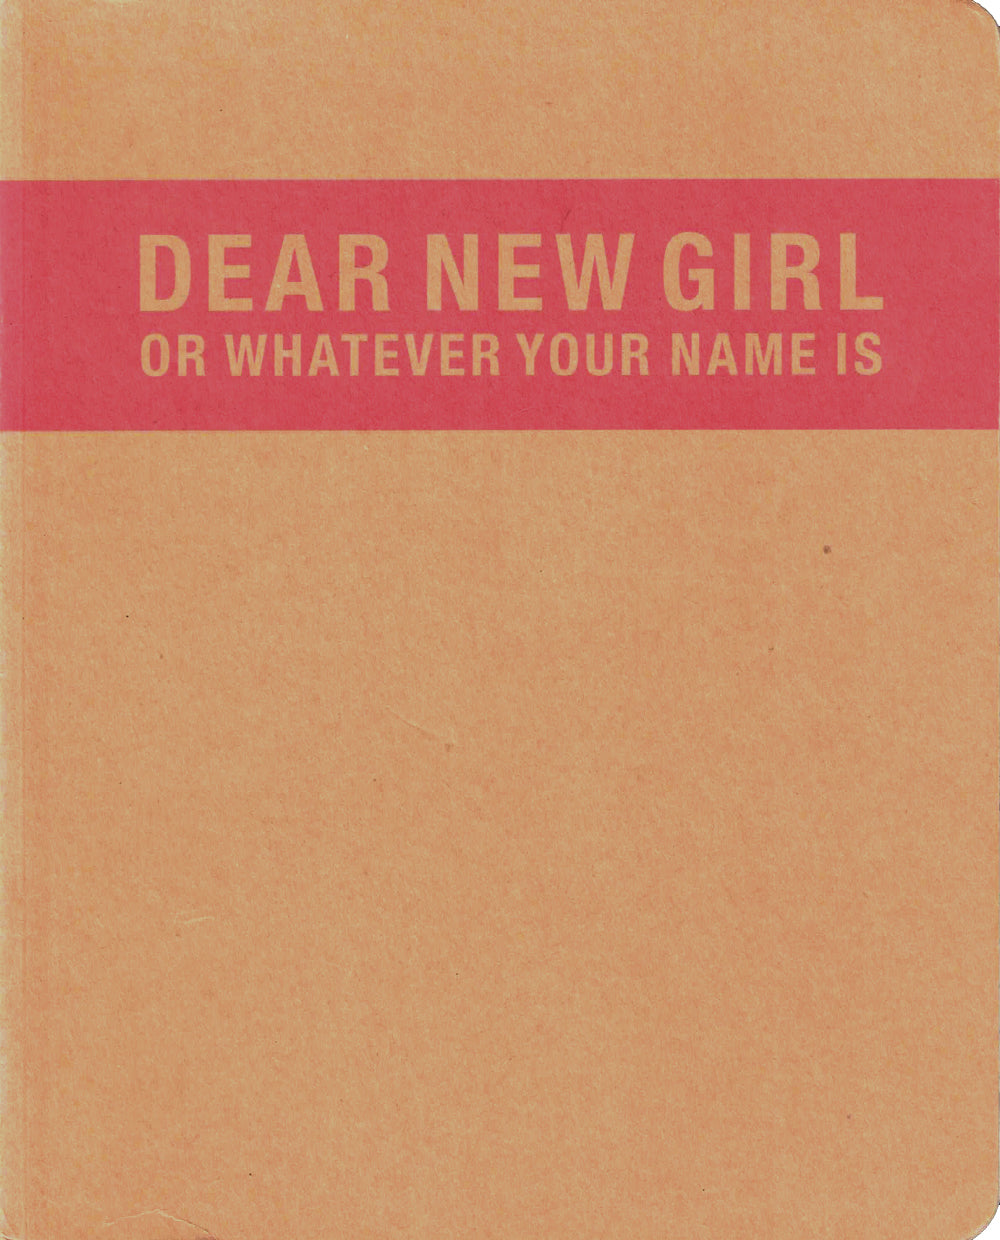 Dear New Girl or Whatever Your Name Is - Book at Kavi Gupta Editions